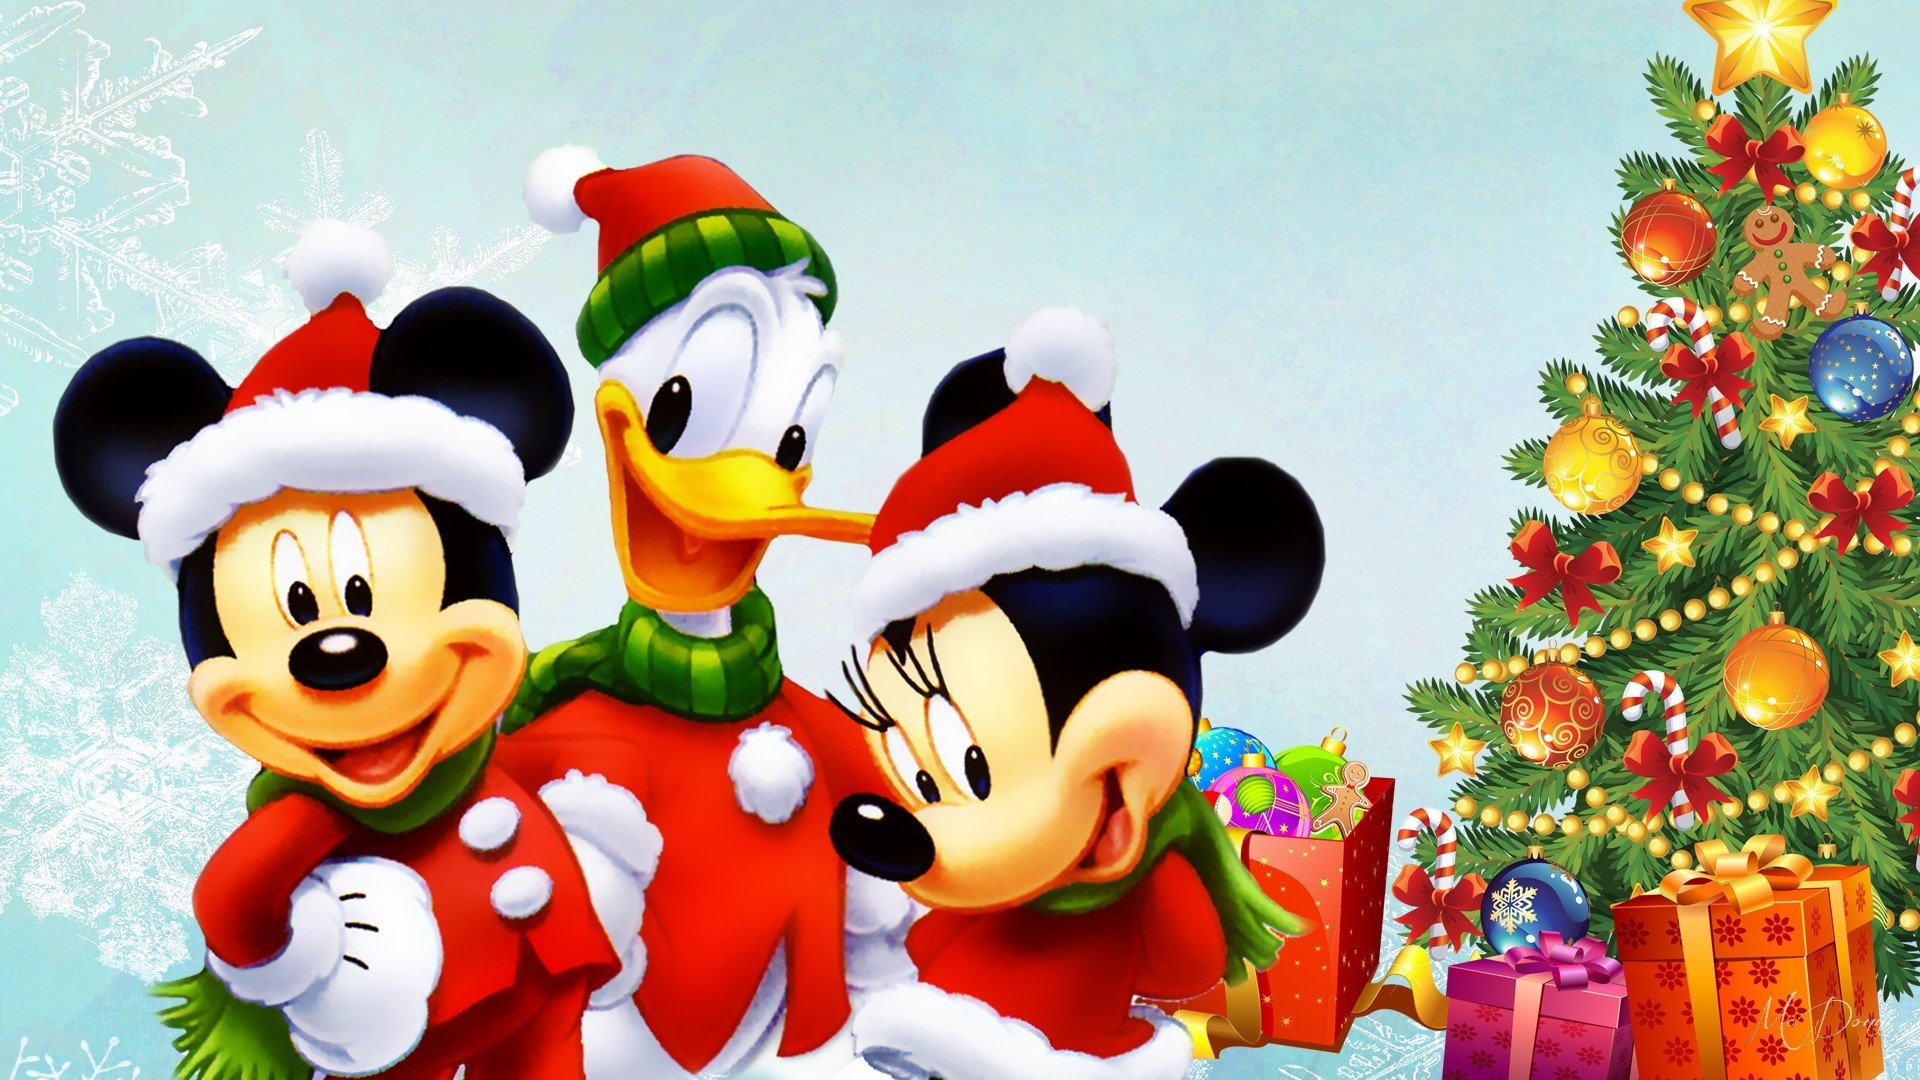 Duck Tag – Mouse Donald Tree Presents Minnie Mickey Christmas Gifts Duck Disney Winter Picture Wallpaper